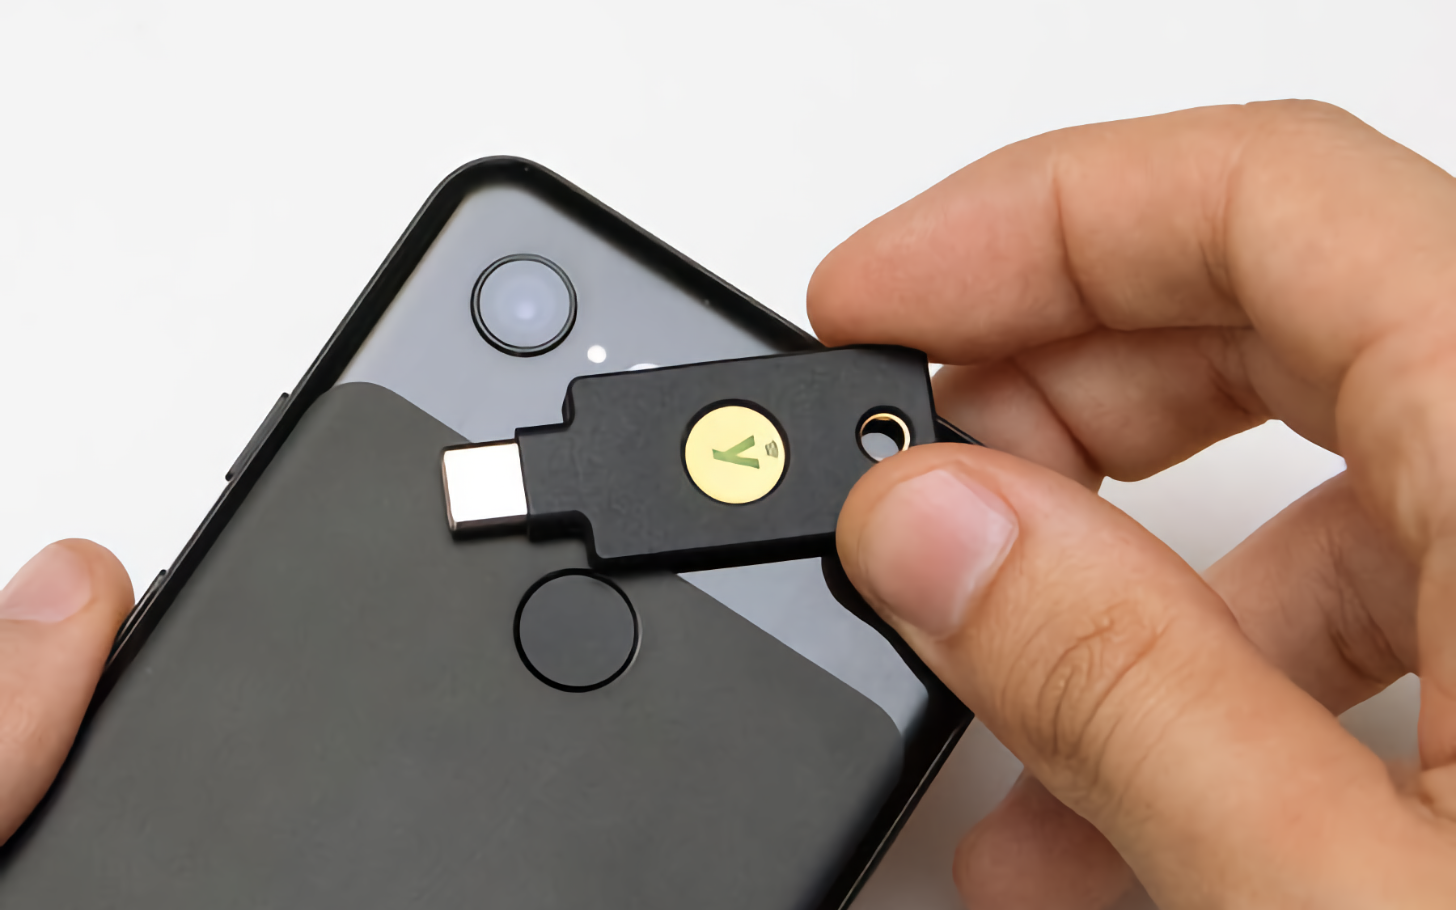 YubiKey NFC fob used for security.